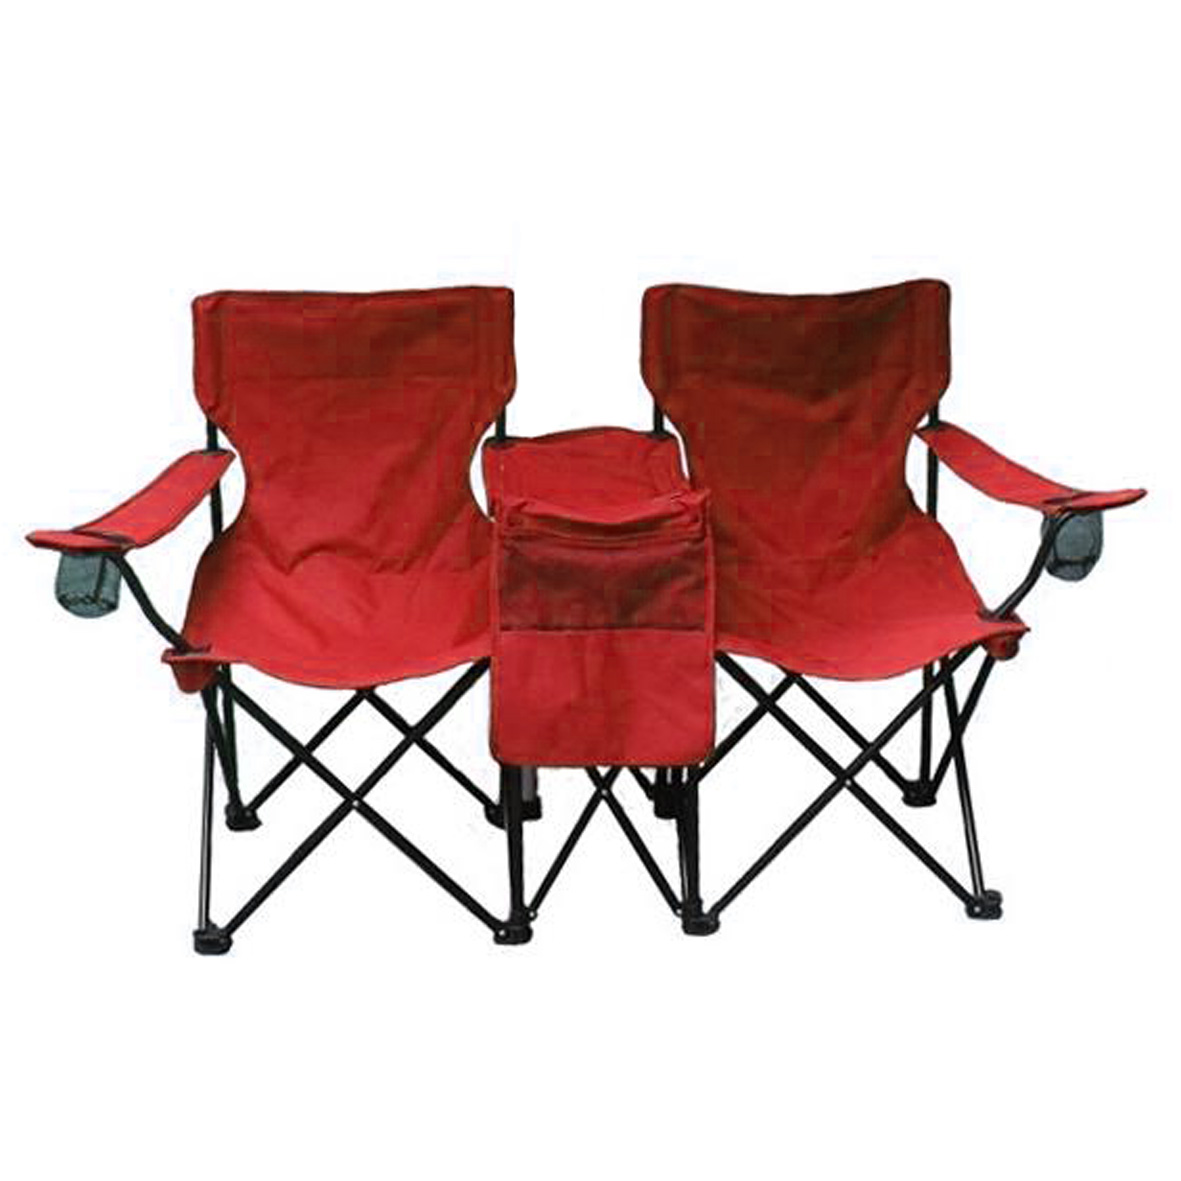 Gl Aaa1357 Folding Beach Chair For Two Person With Newspaper Pocket